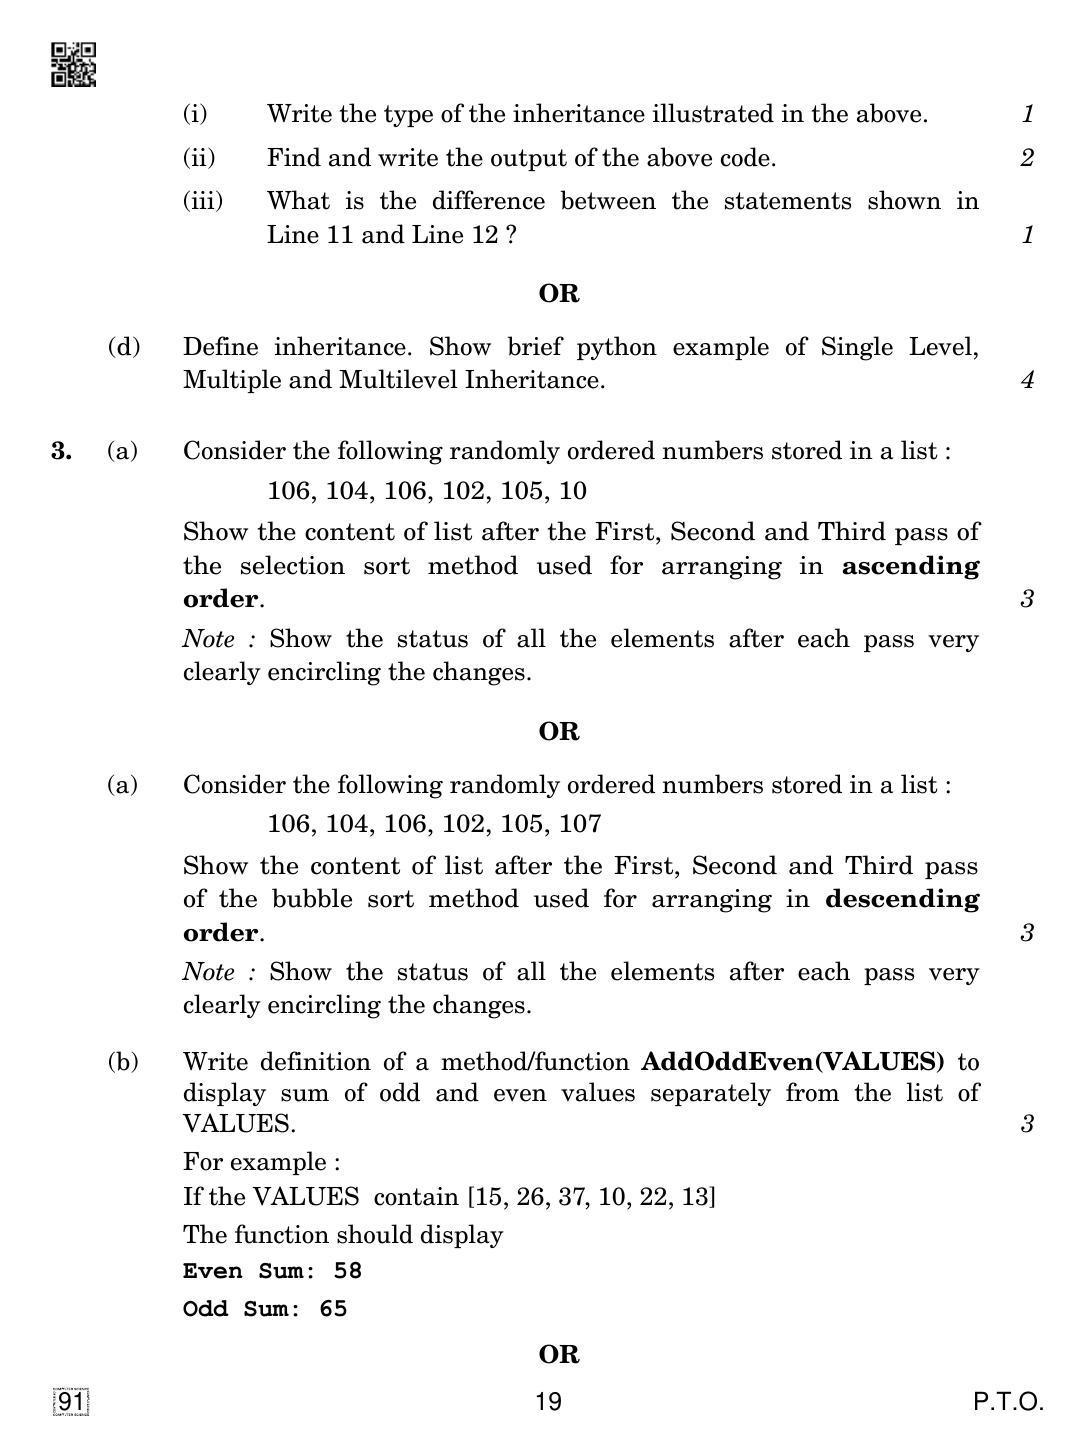 CBSE Class 12 91 Computer Science 2019 Question Paper - Page 19